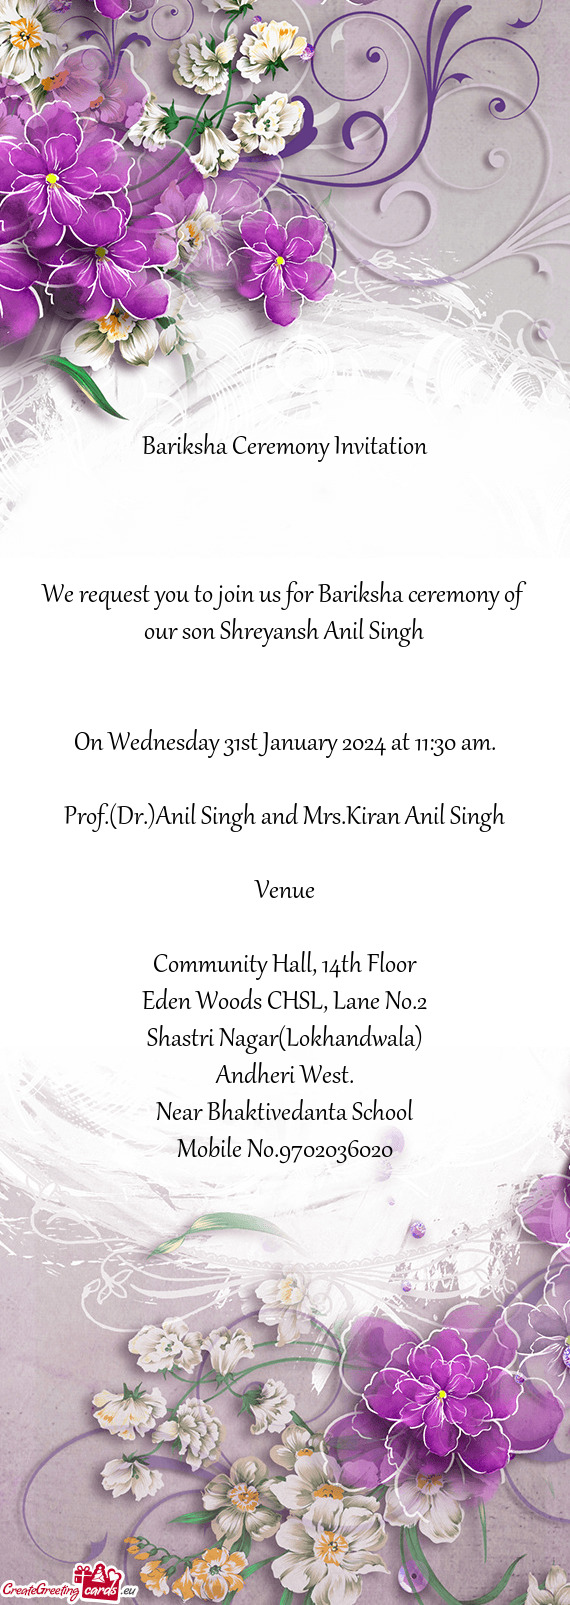 We request you to join us for Bariksha ceremony of our son Shreyansh Anil Singh